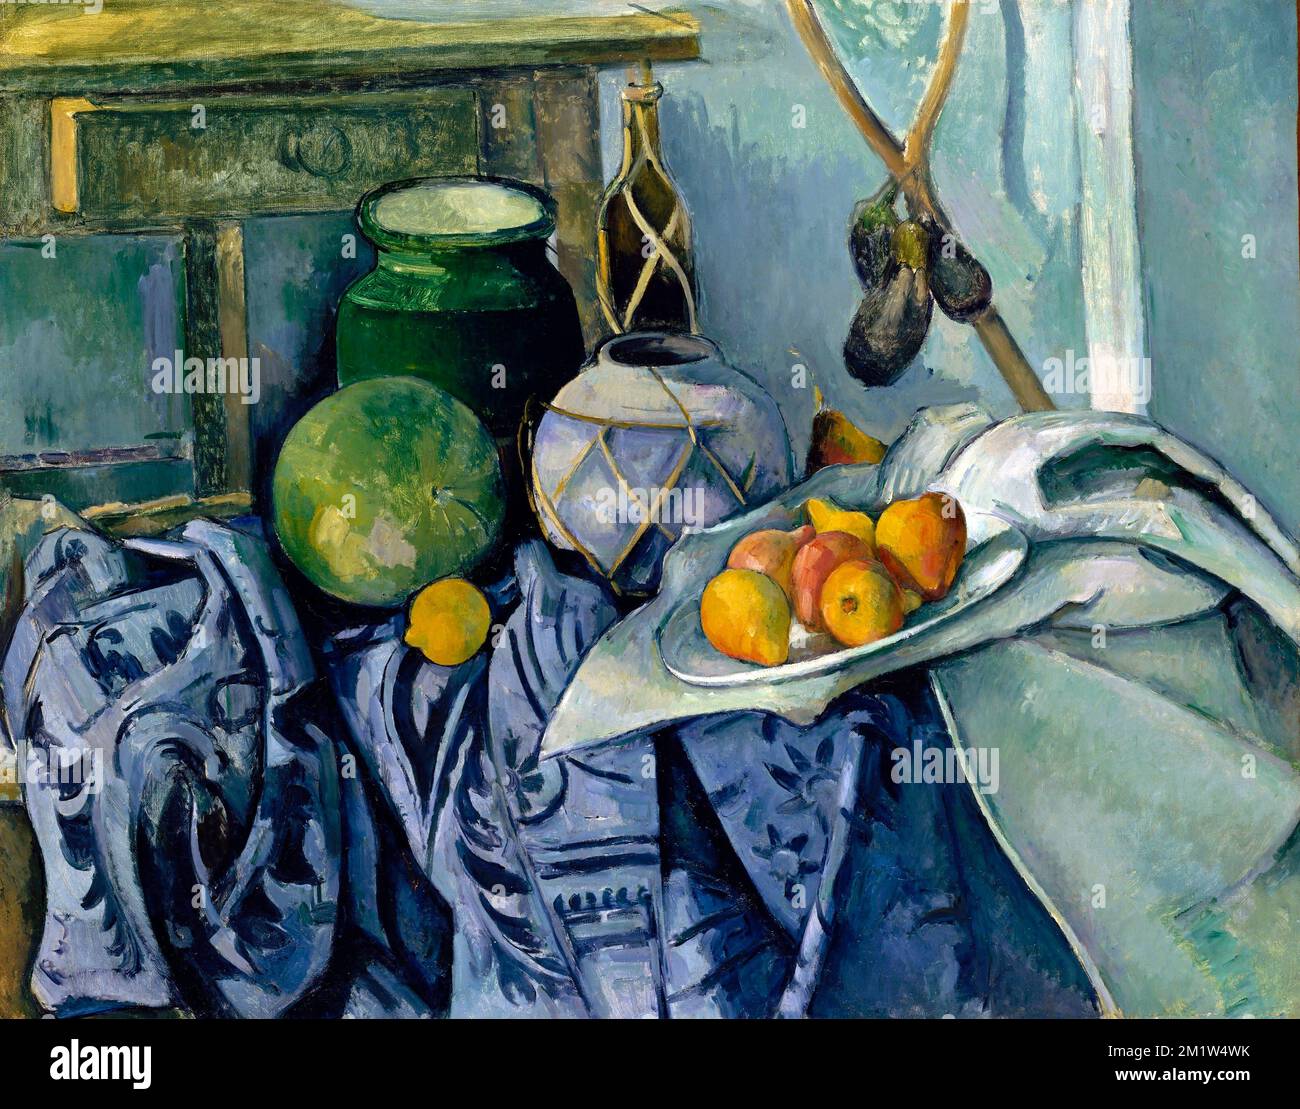 Still Life with a Ginger Jar and Eggplants by Paul Cezanne (1839-1906), oil on canvas, 1893/4 Stock Photo